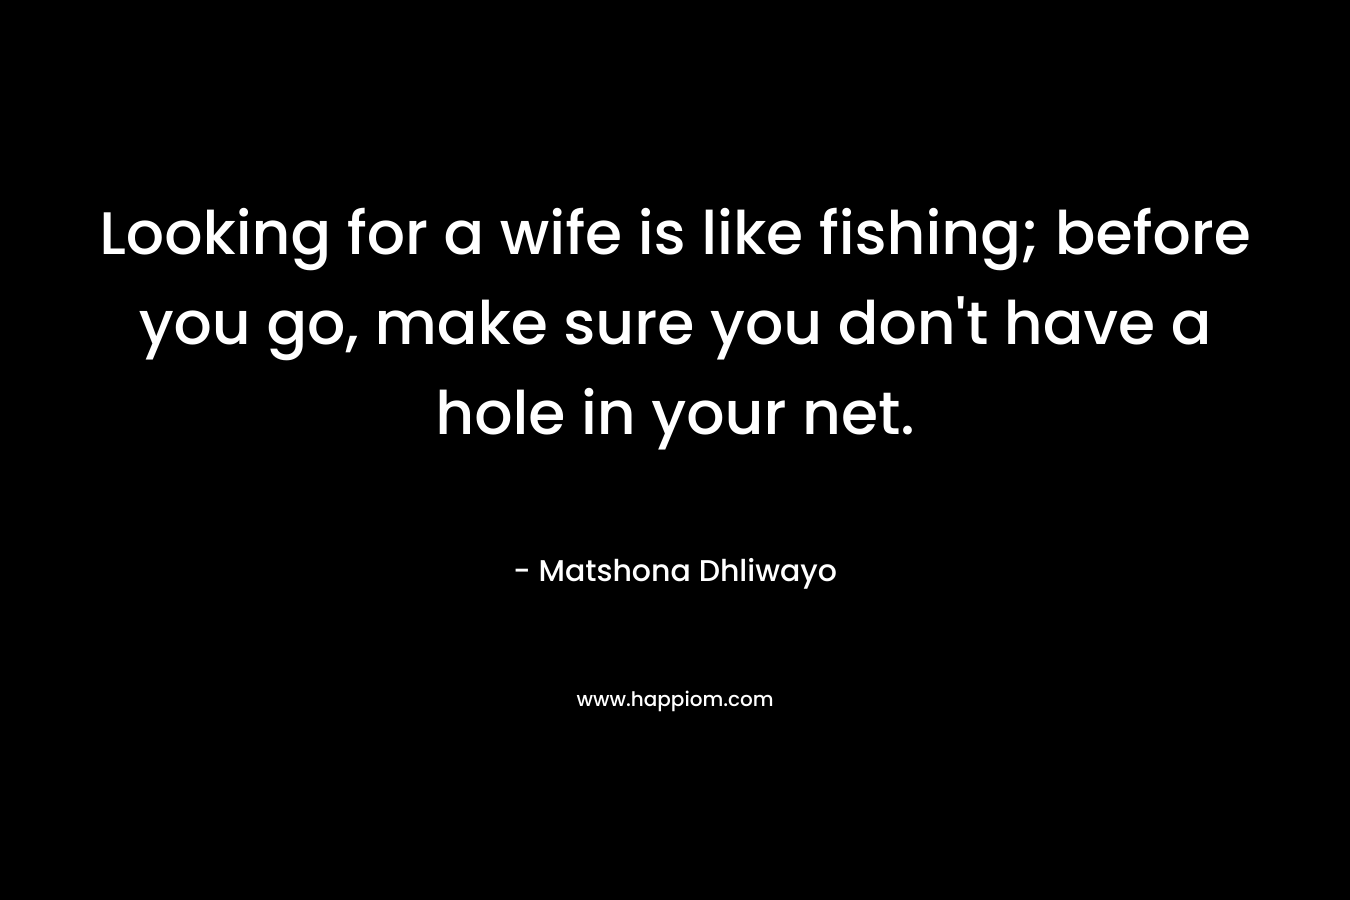 Looking for a wife is like fishing; before you go, make sure you don’t have a hole in your net. – Matshona Dhliwayo